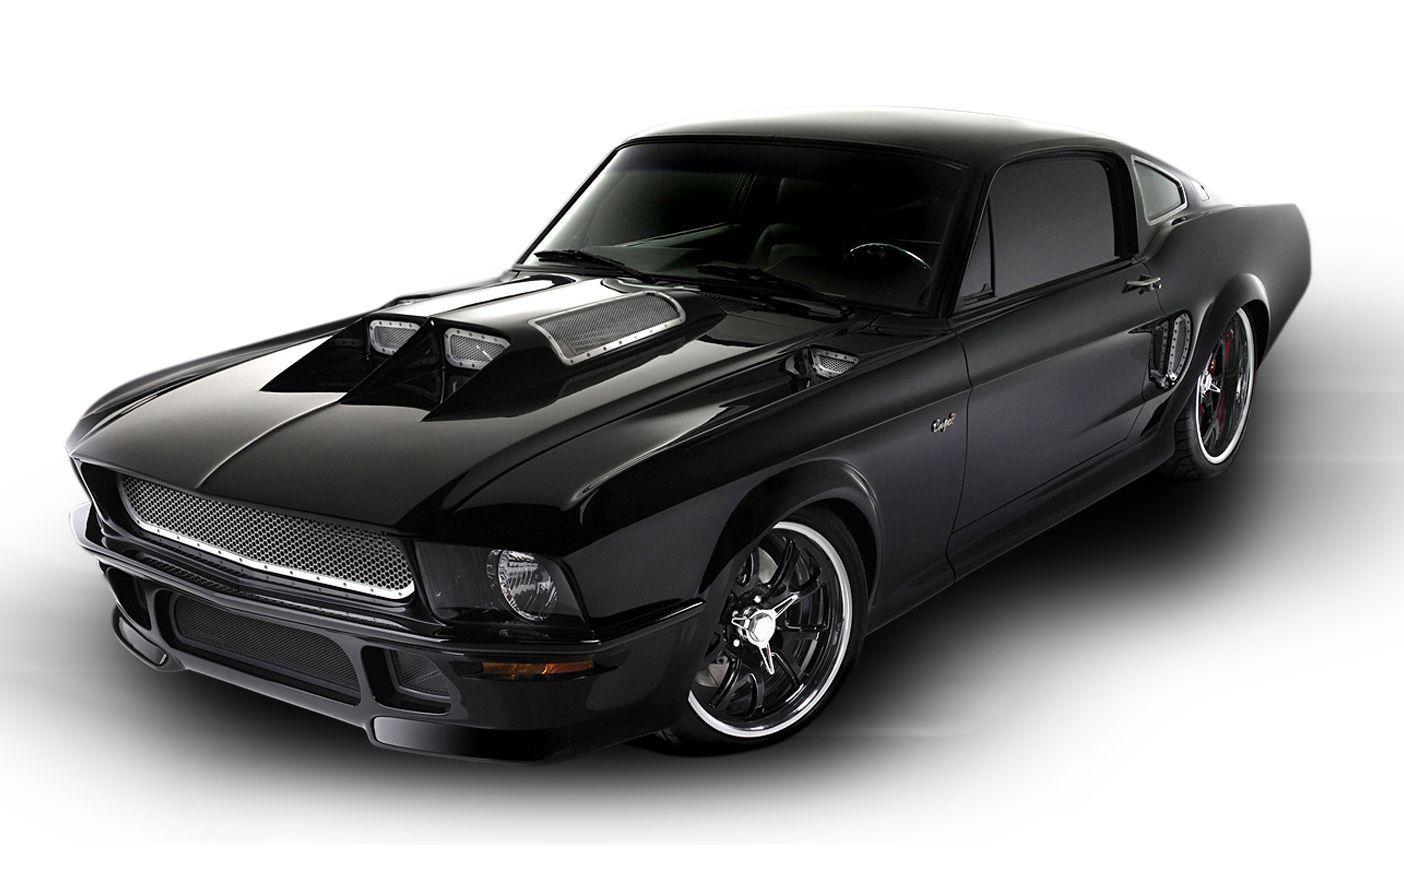 Ford Mustang 1967 Modified Wallpaper. High Definition Wallpaper